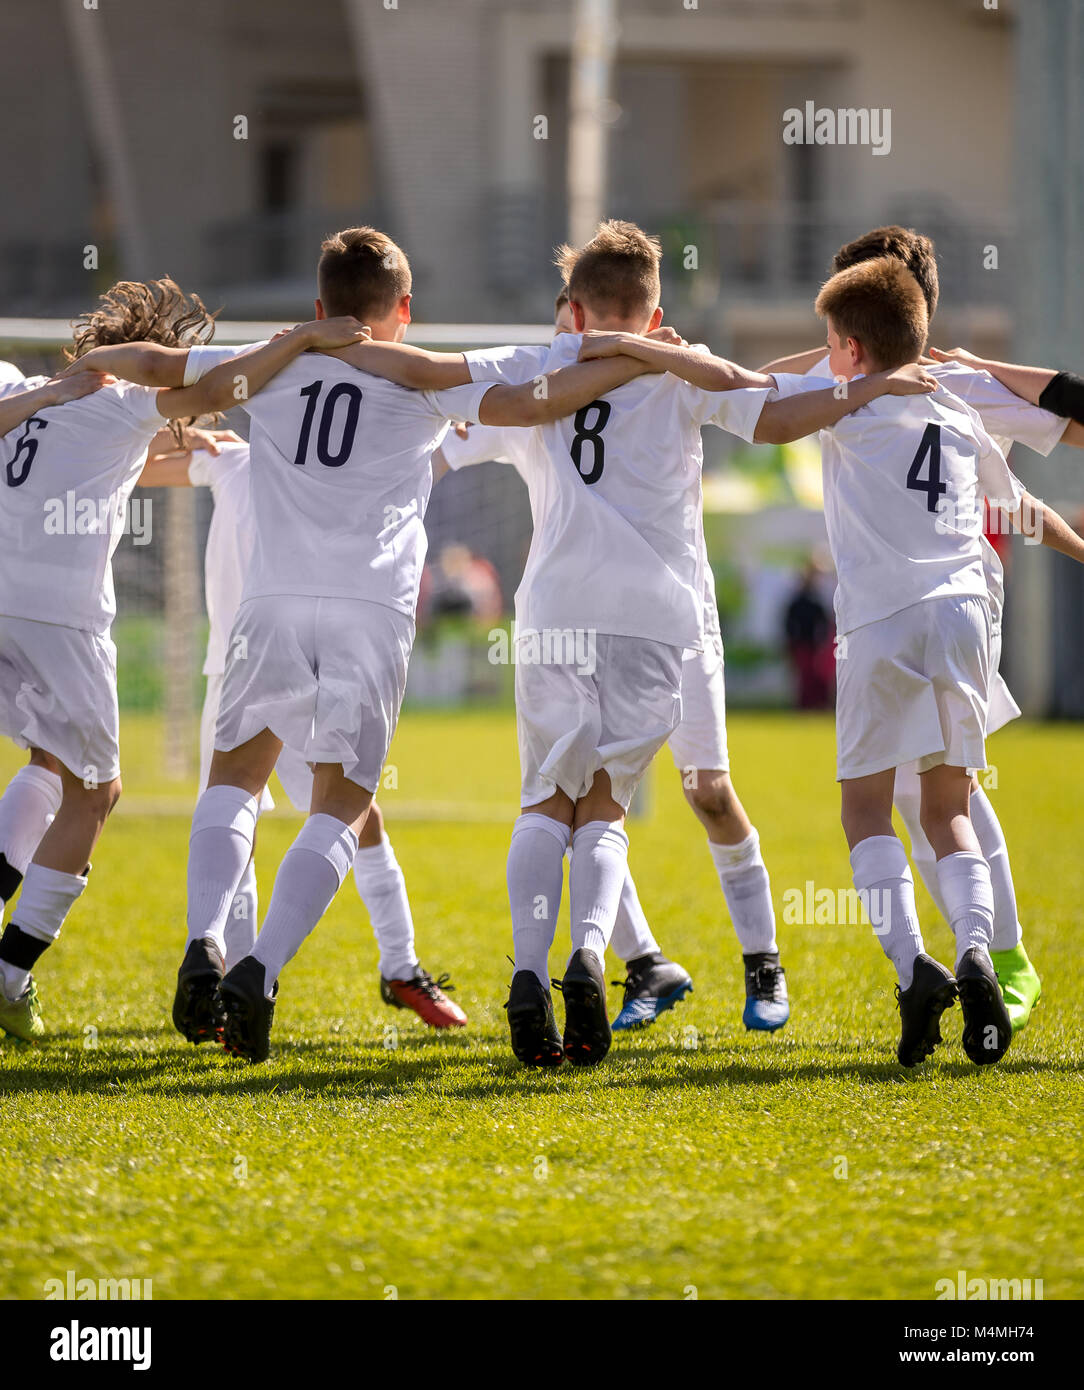 Happy Soccer Players. Happy Boys Winning Soccer Match. Young Successful Soccer Football Players Dancing Together on the Pitch. Stock Photo